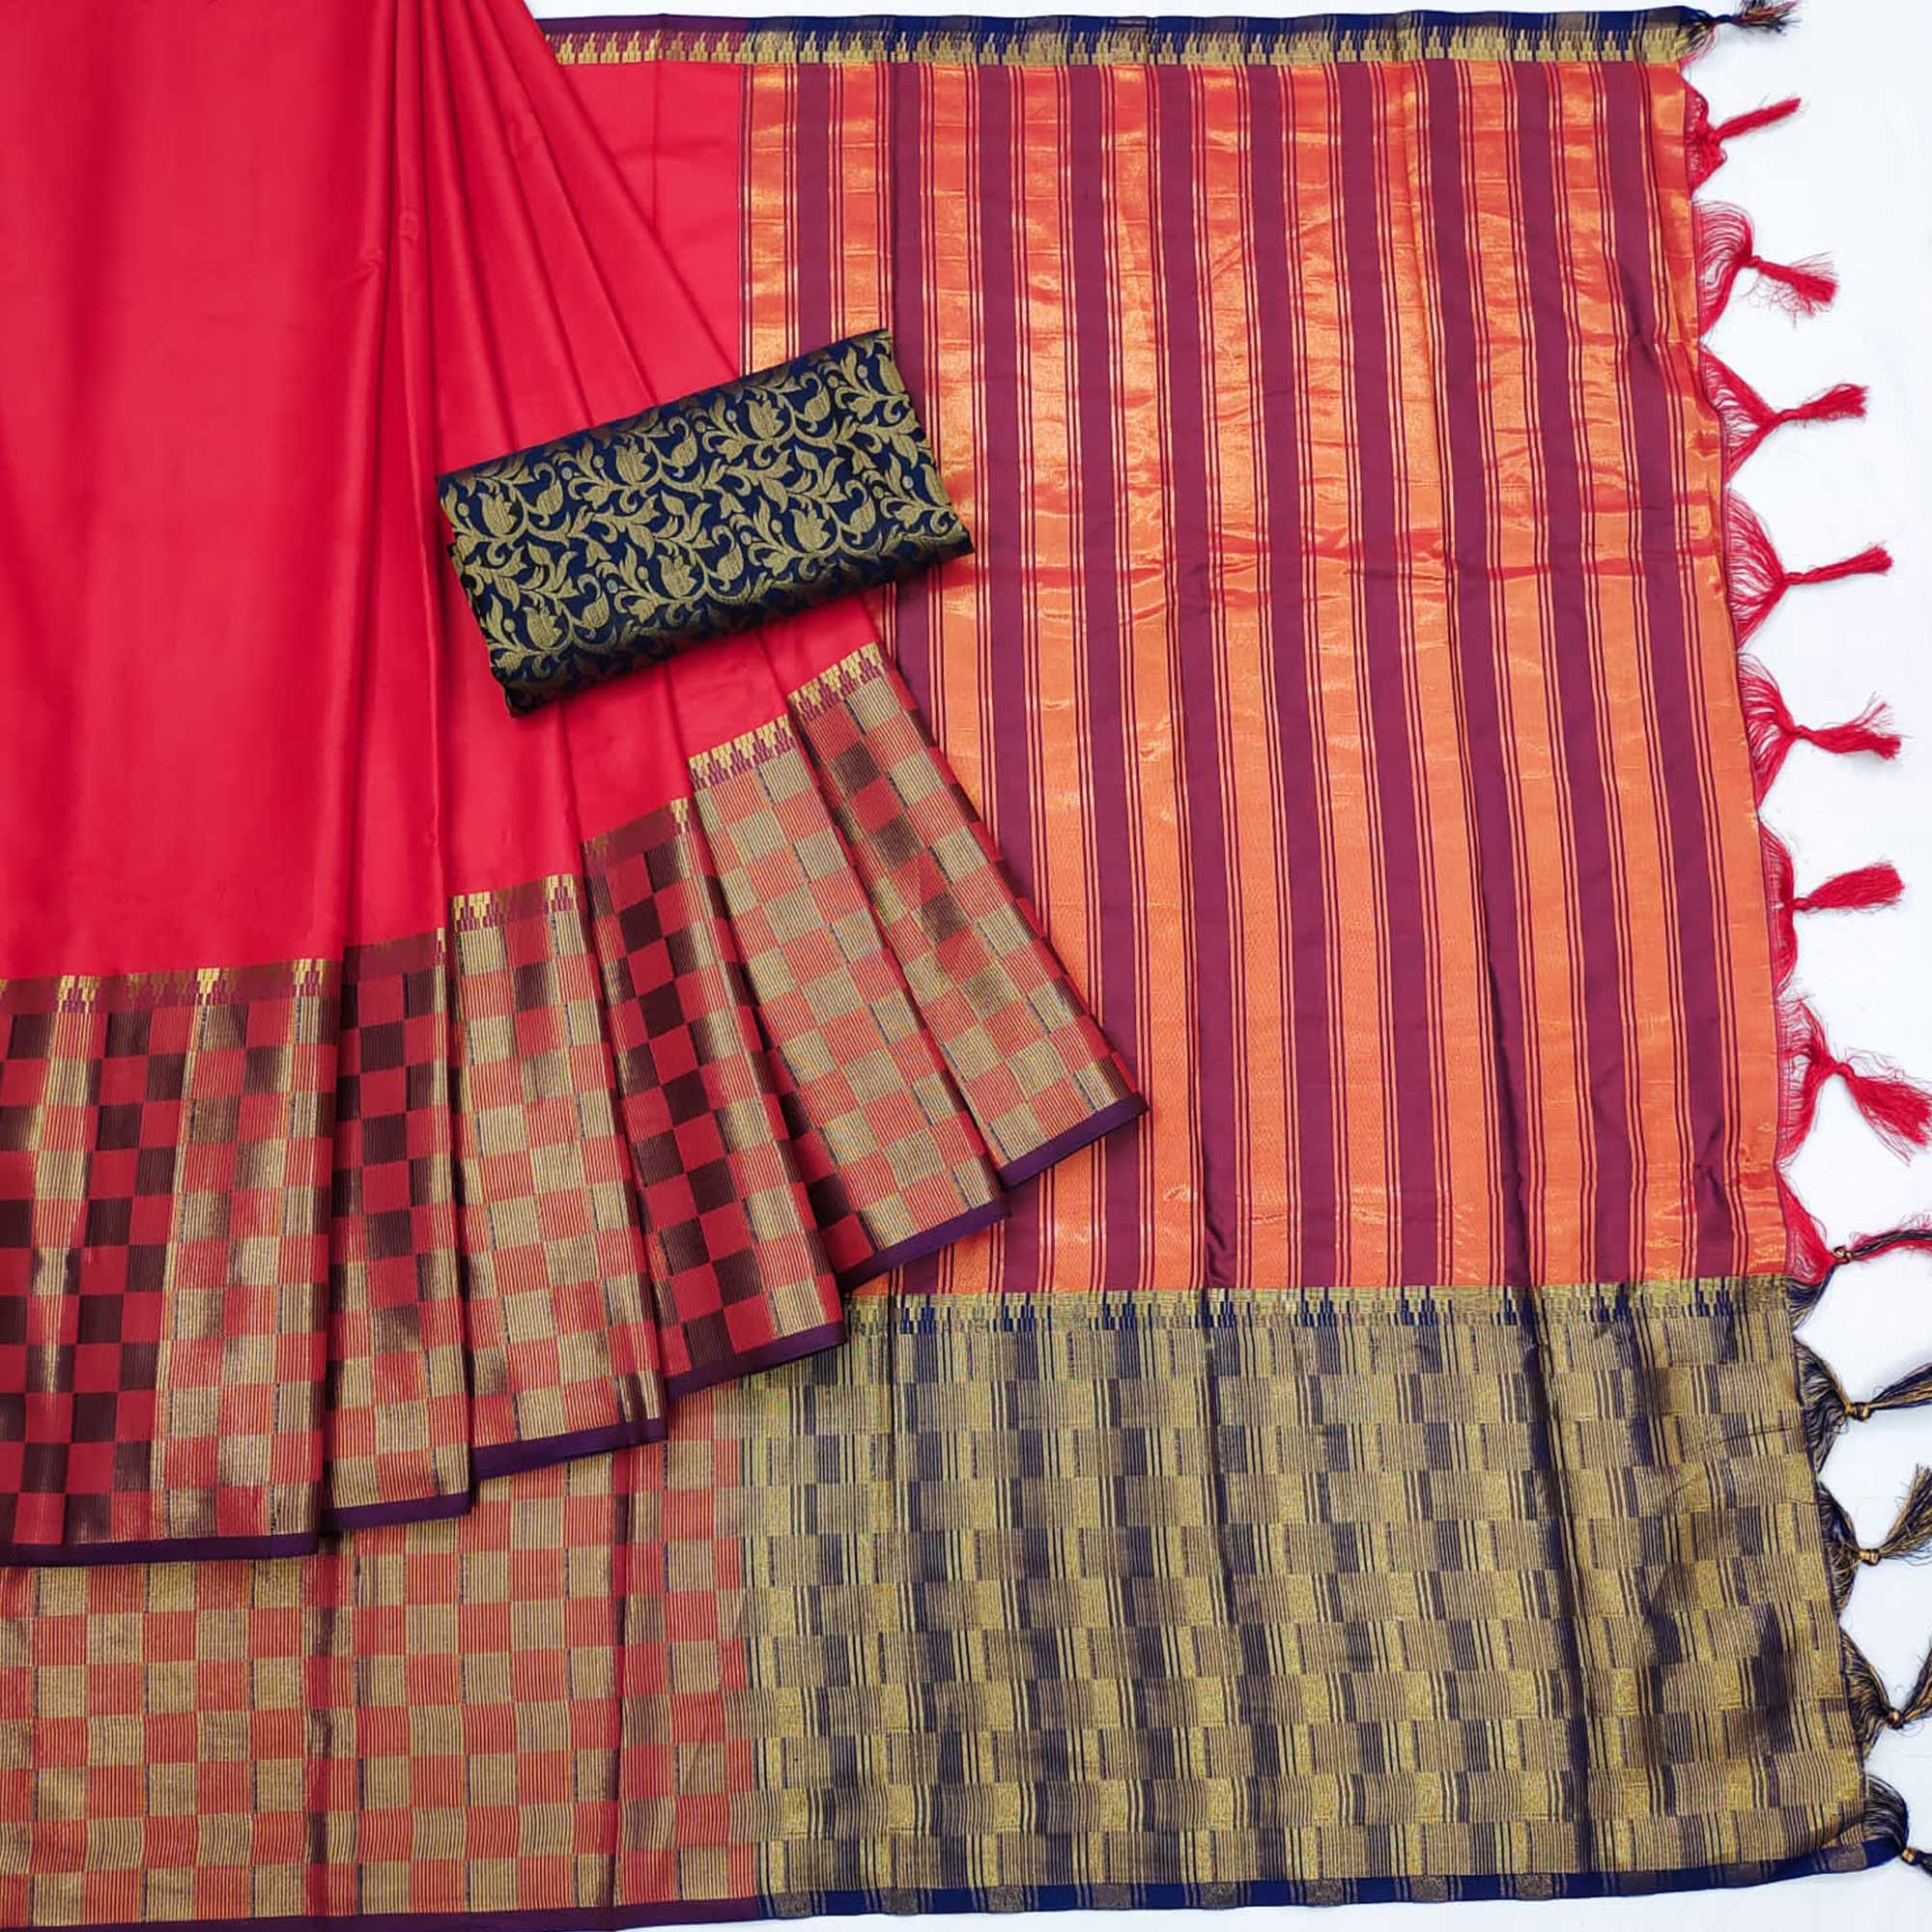 Red Woven Cotton Silk Saree With Tassels